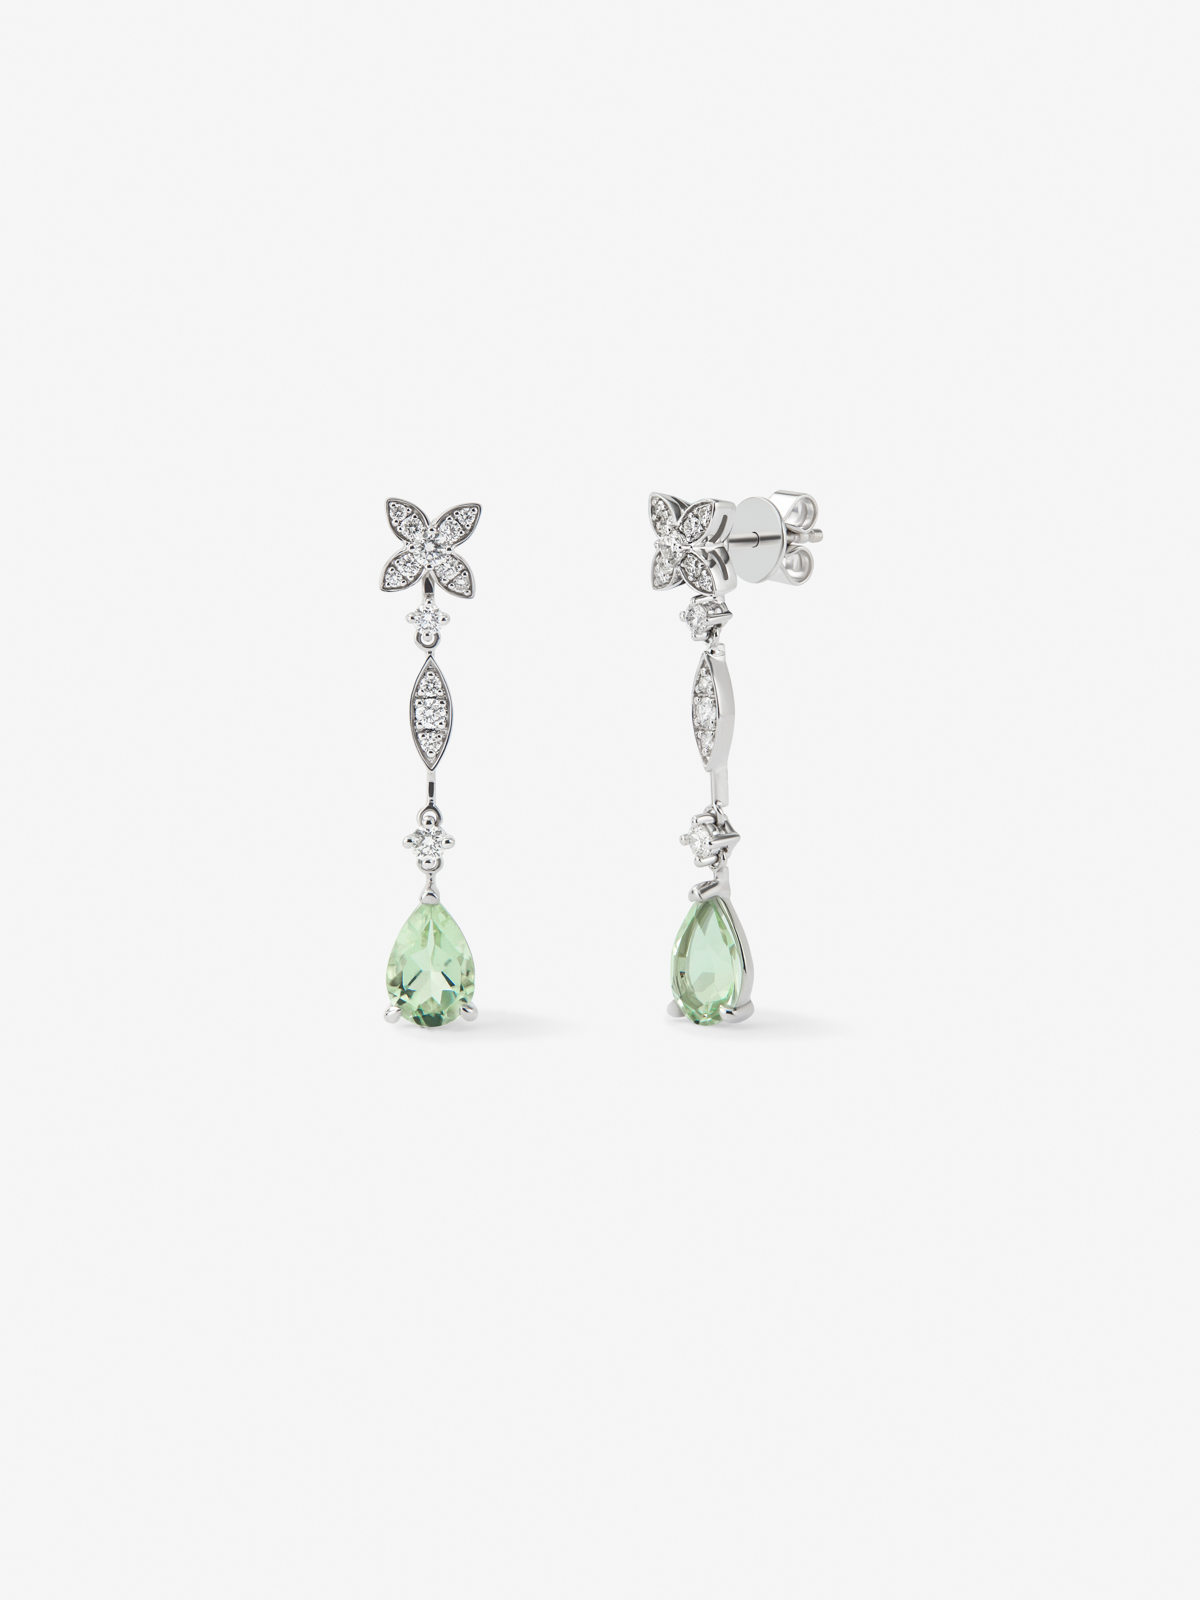 18K white gold earrings with 0.63 ct brilliant-cut diamonds and pear-cut green amethysts